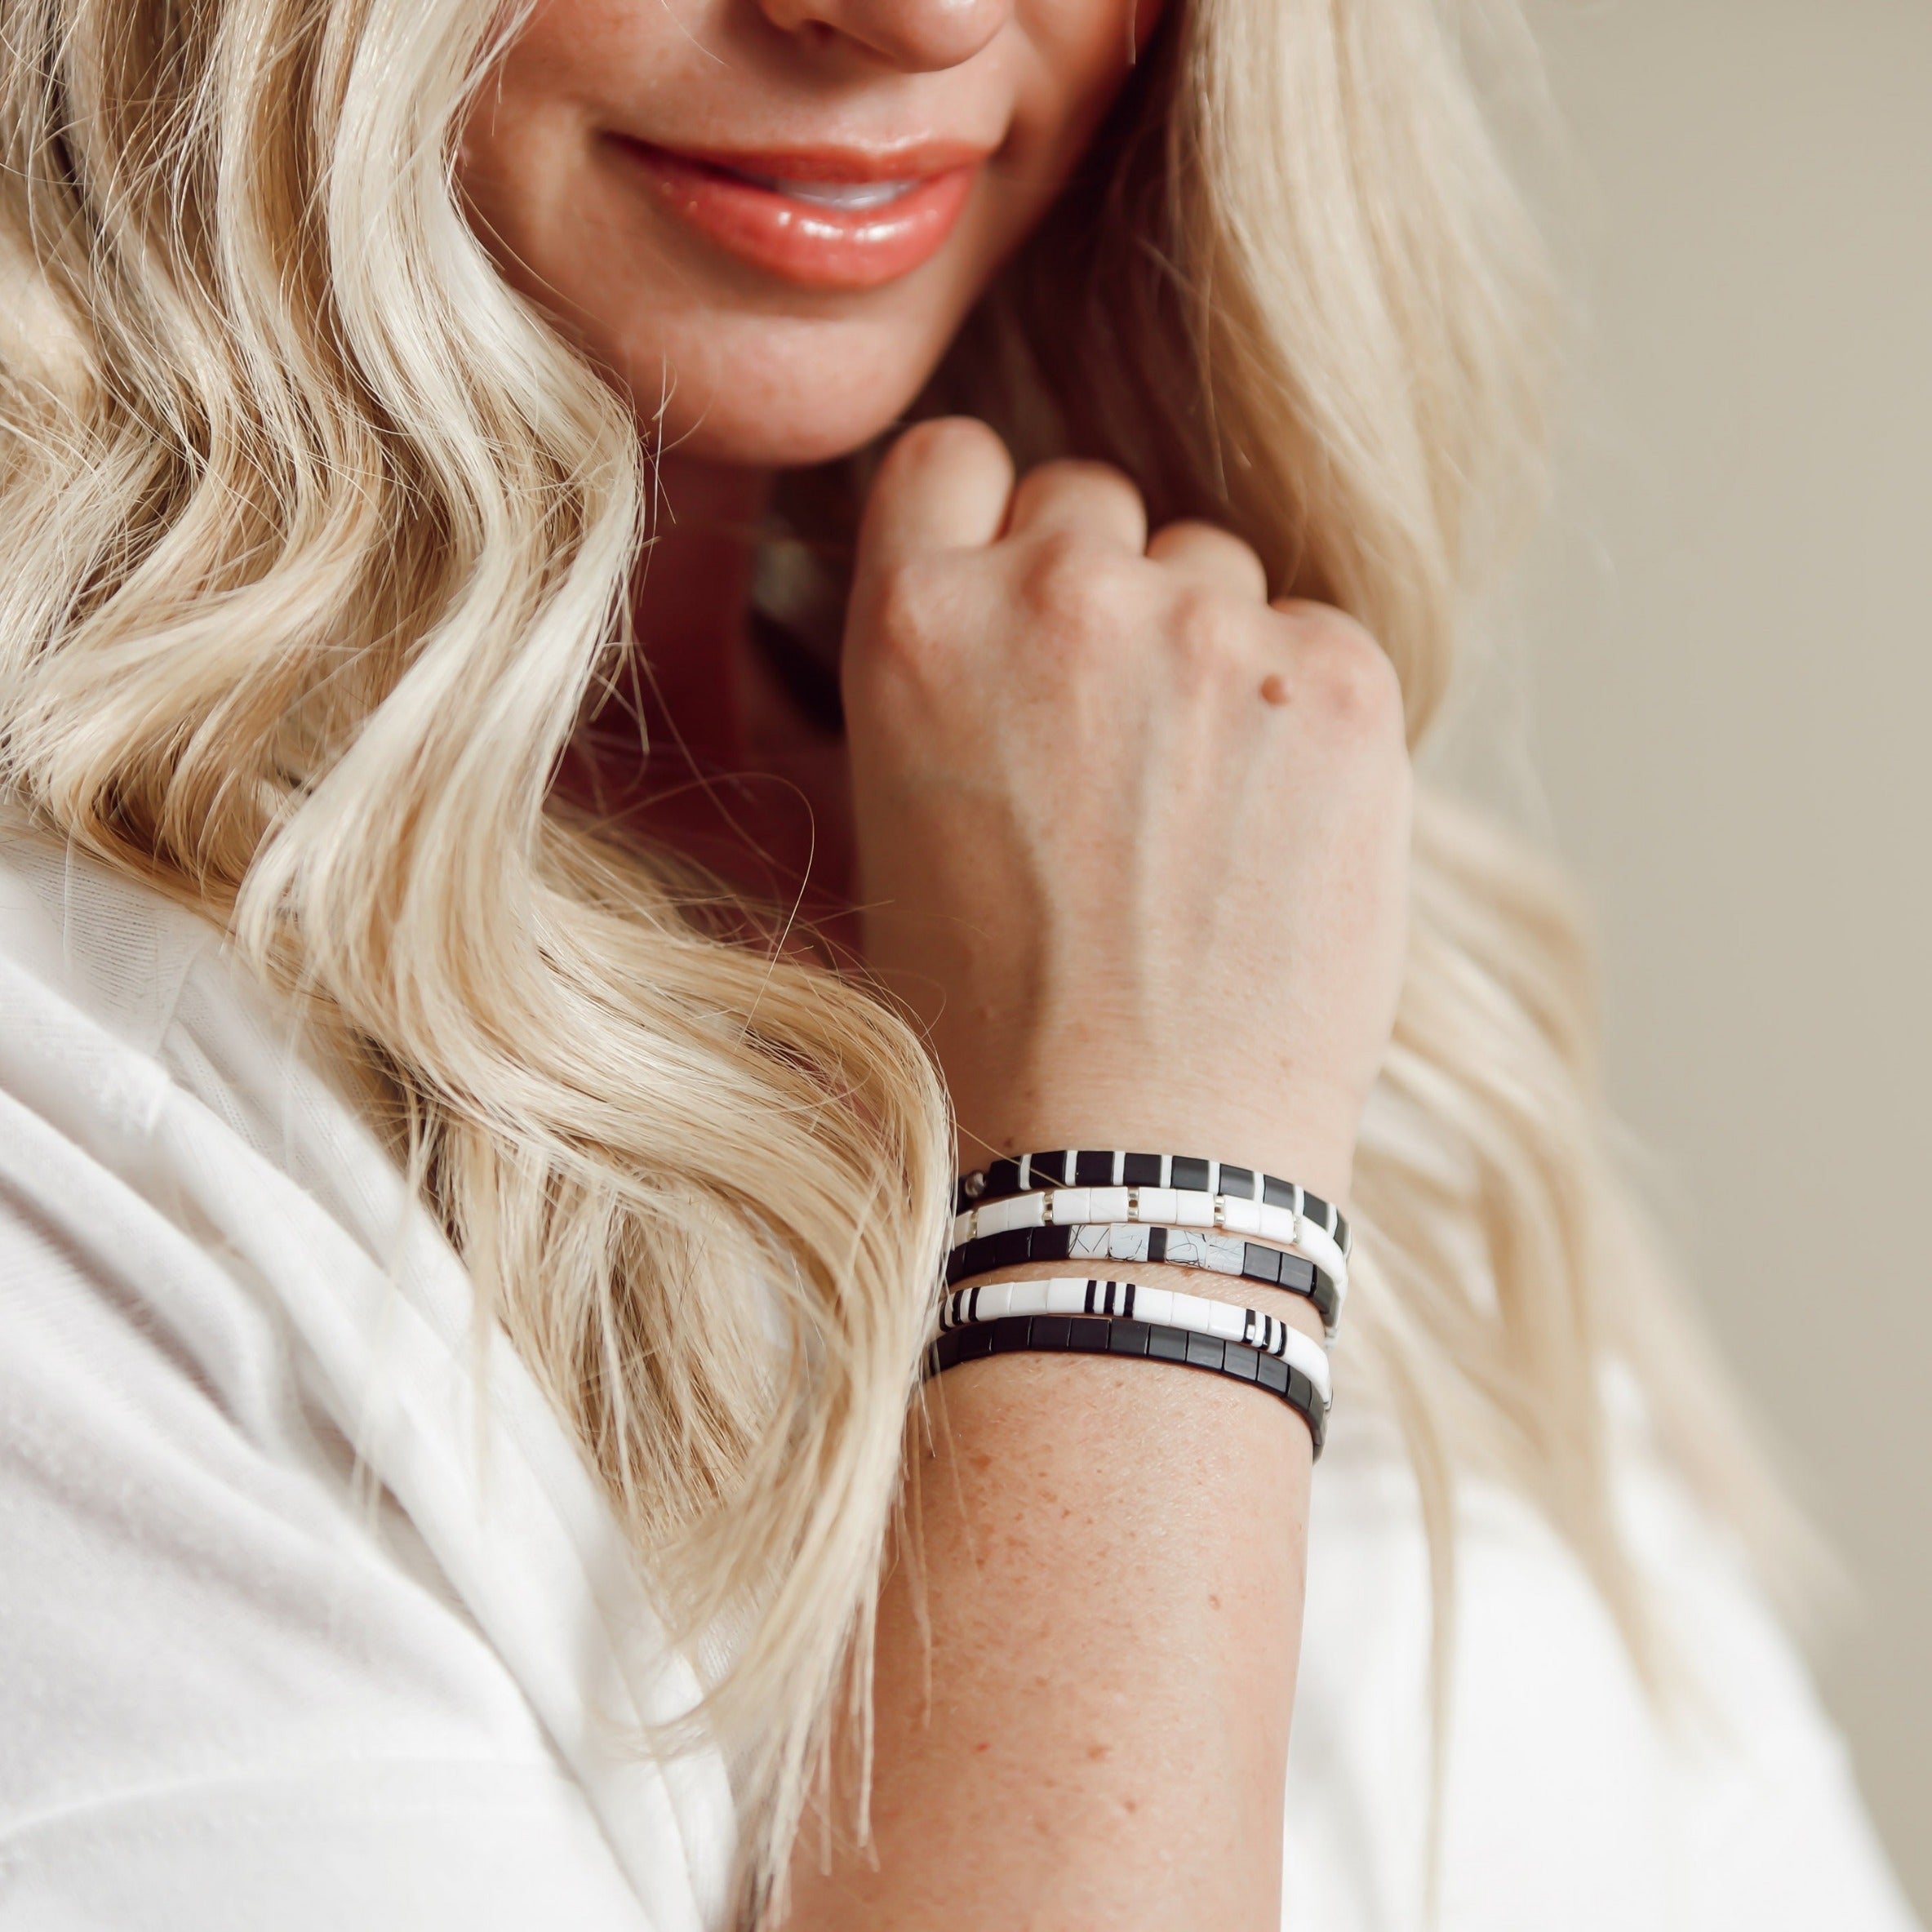 a woman wearing a white shirt and a black and white bracelet